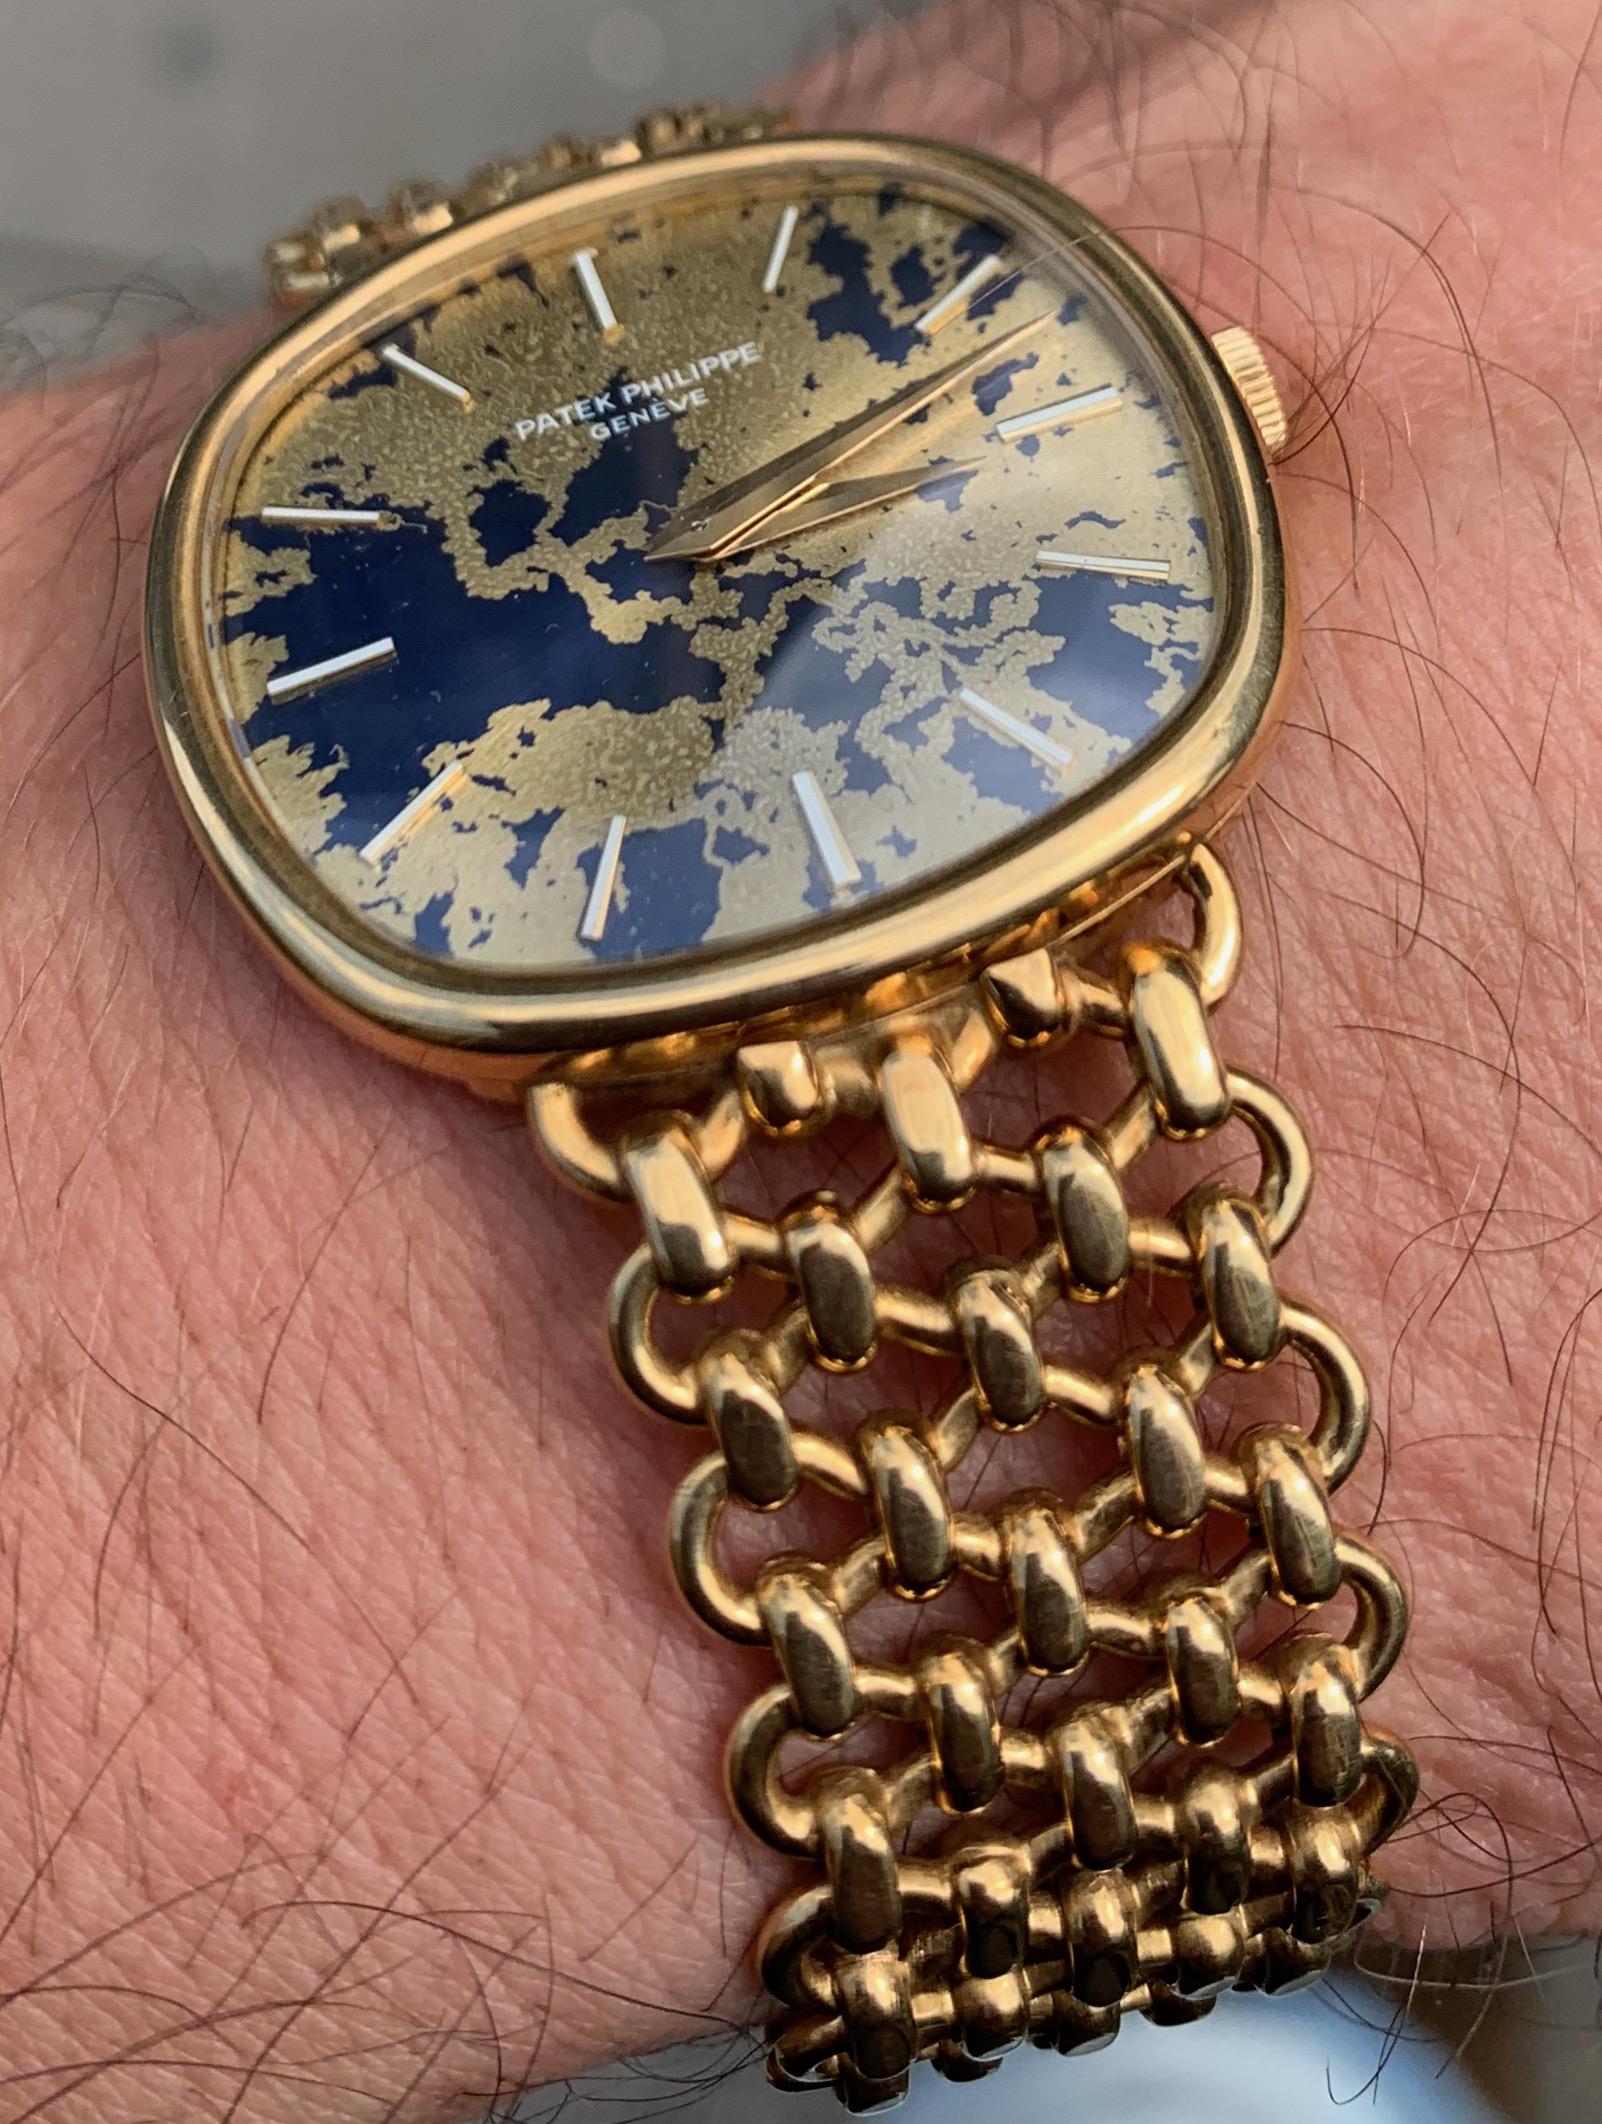 Unique Patek Philippe 3844 with Amazing Worldmap Dial / 4. of july ! For Sale 7